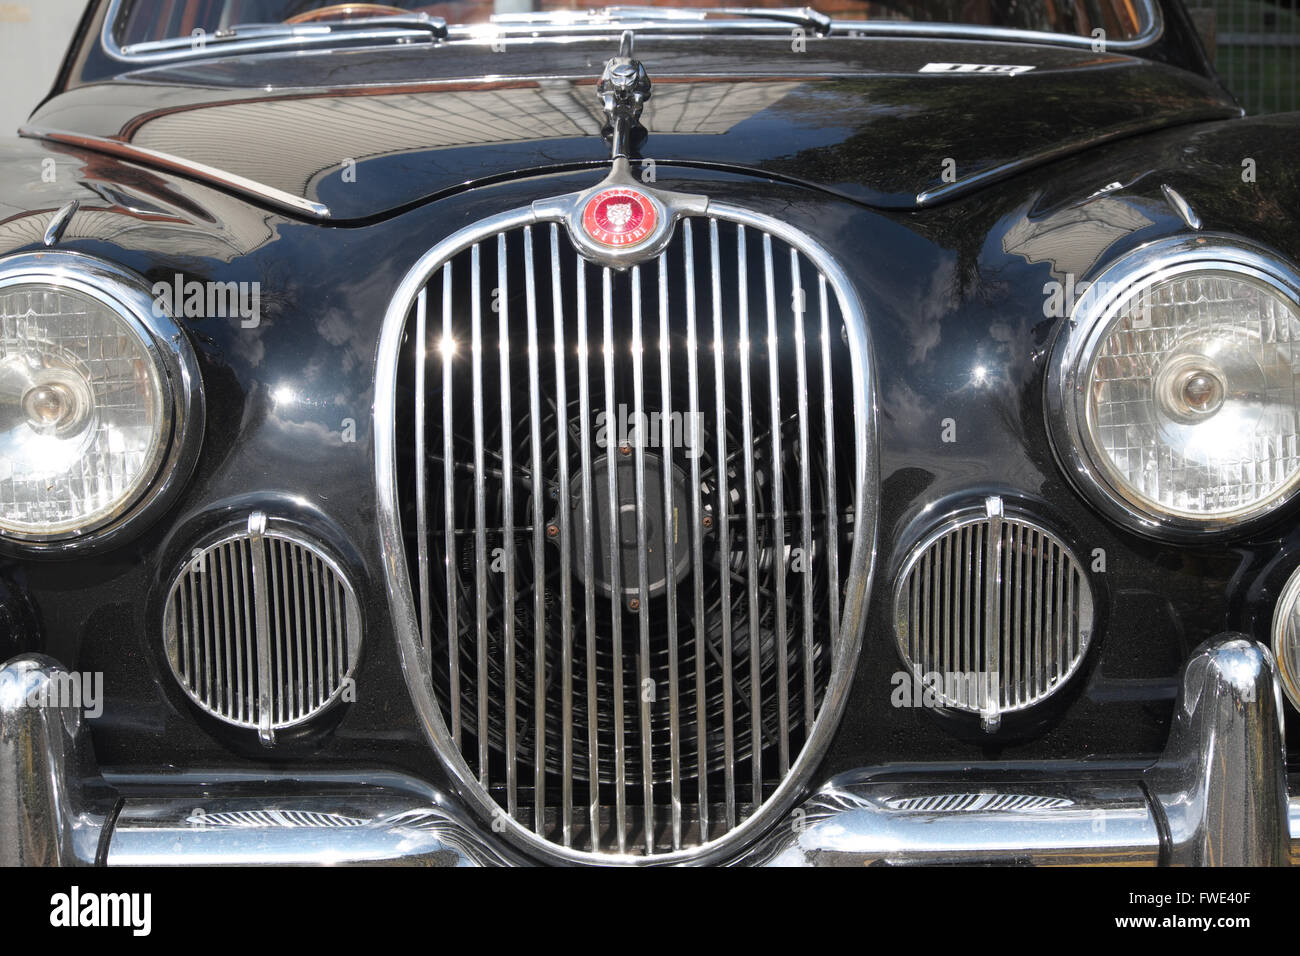 Jaguar Mark 1 car with 3.4 litre engine badge built in the 1960s Stock Photo